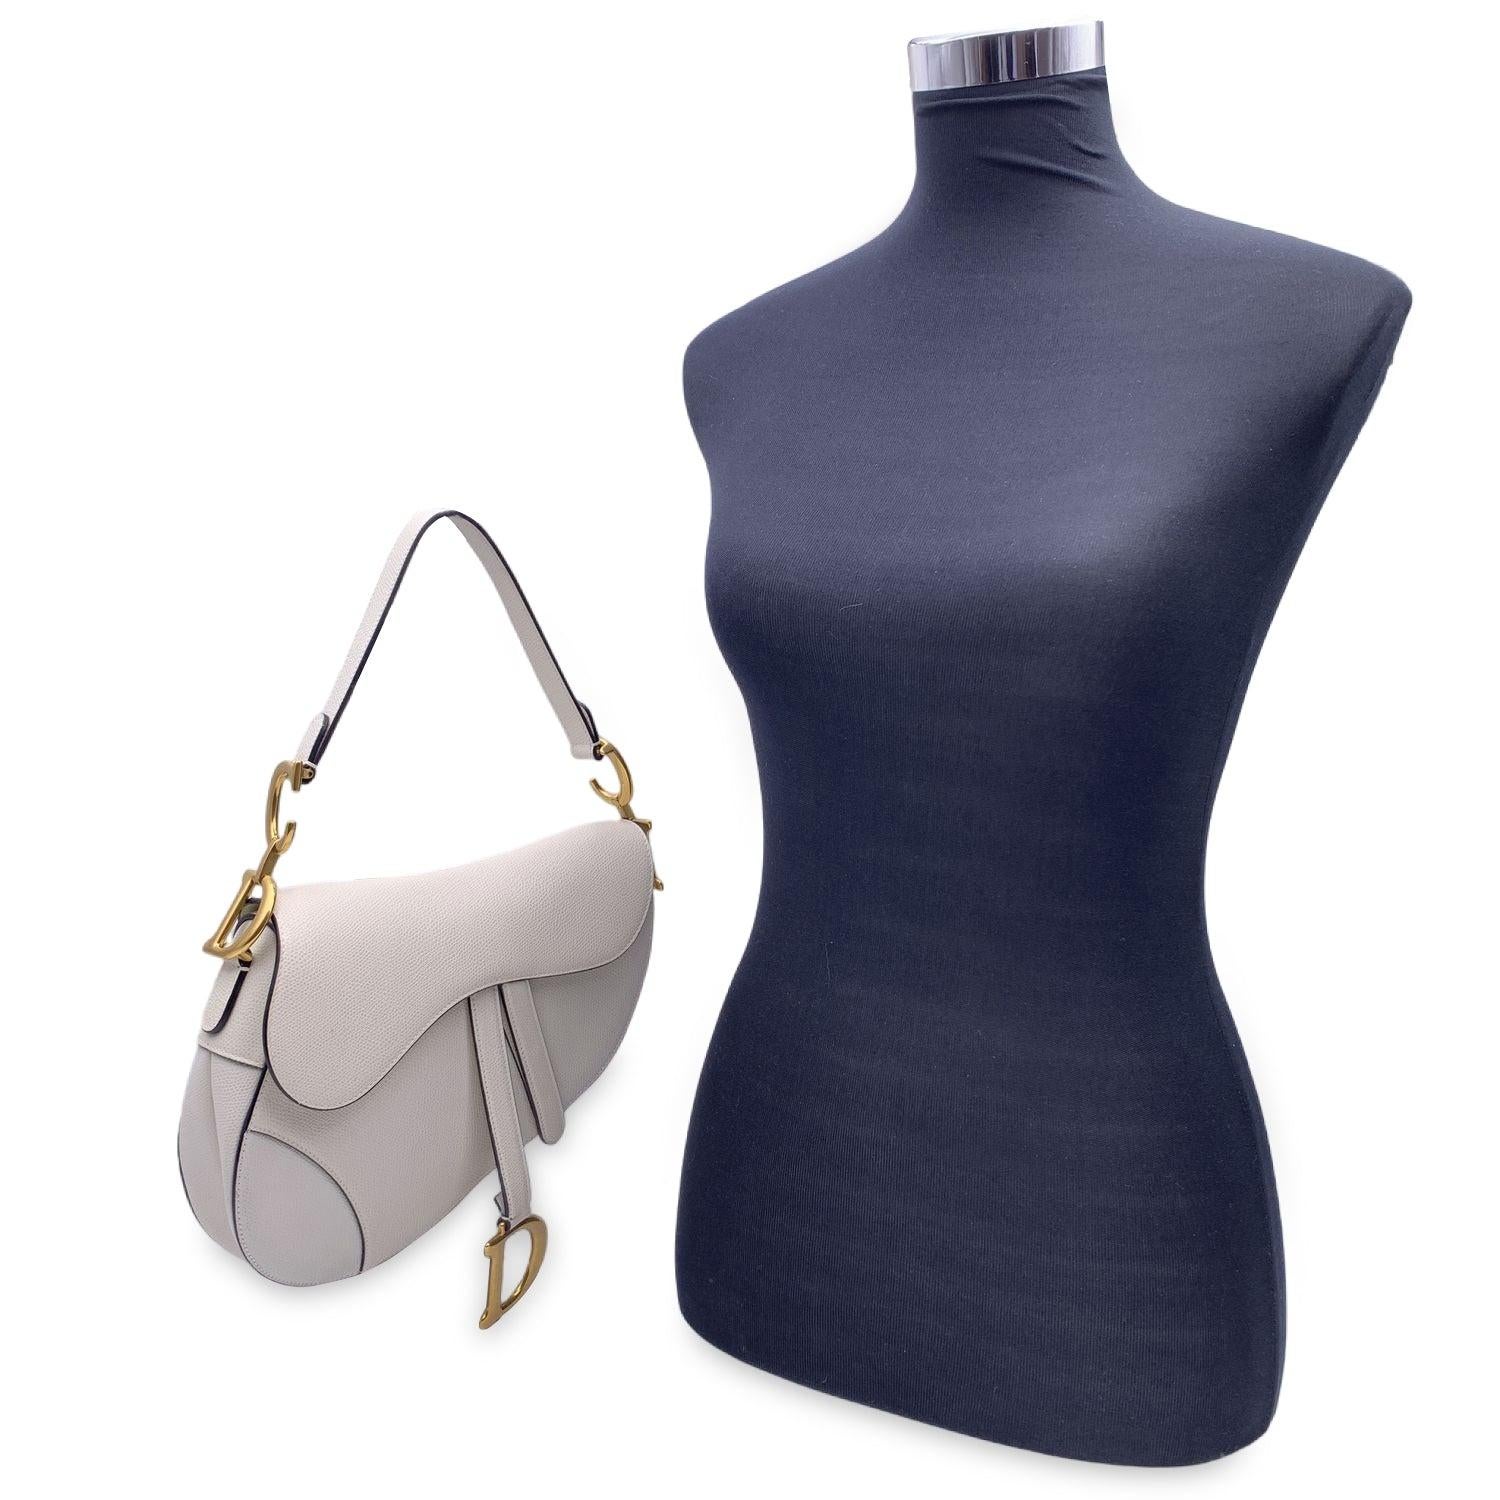 This beautiful Bag will come with a Certificate of Authenticity provided by Entrupy. The certificate will be provided at no further cost. Gorgeous CHRISTIAN DIOR Saddle Bag. This stylish shoulder bag is crafted in milk-colored grained calfskin, The